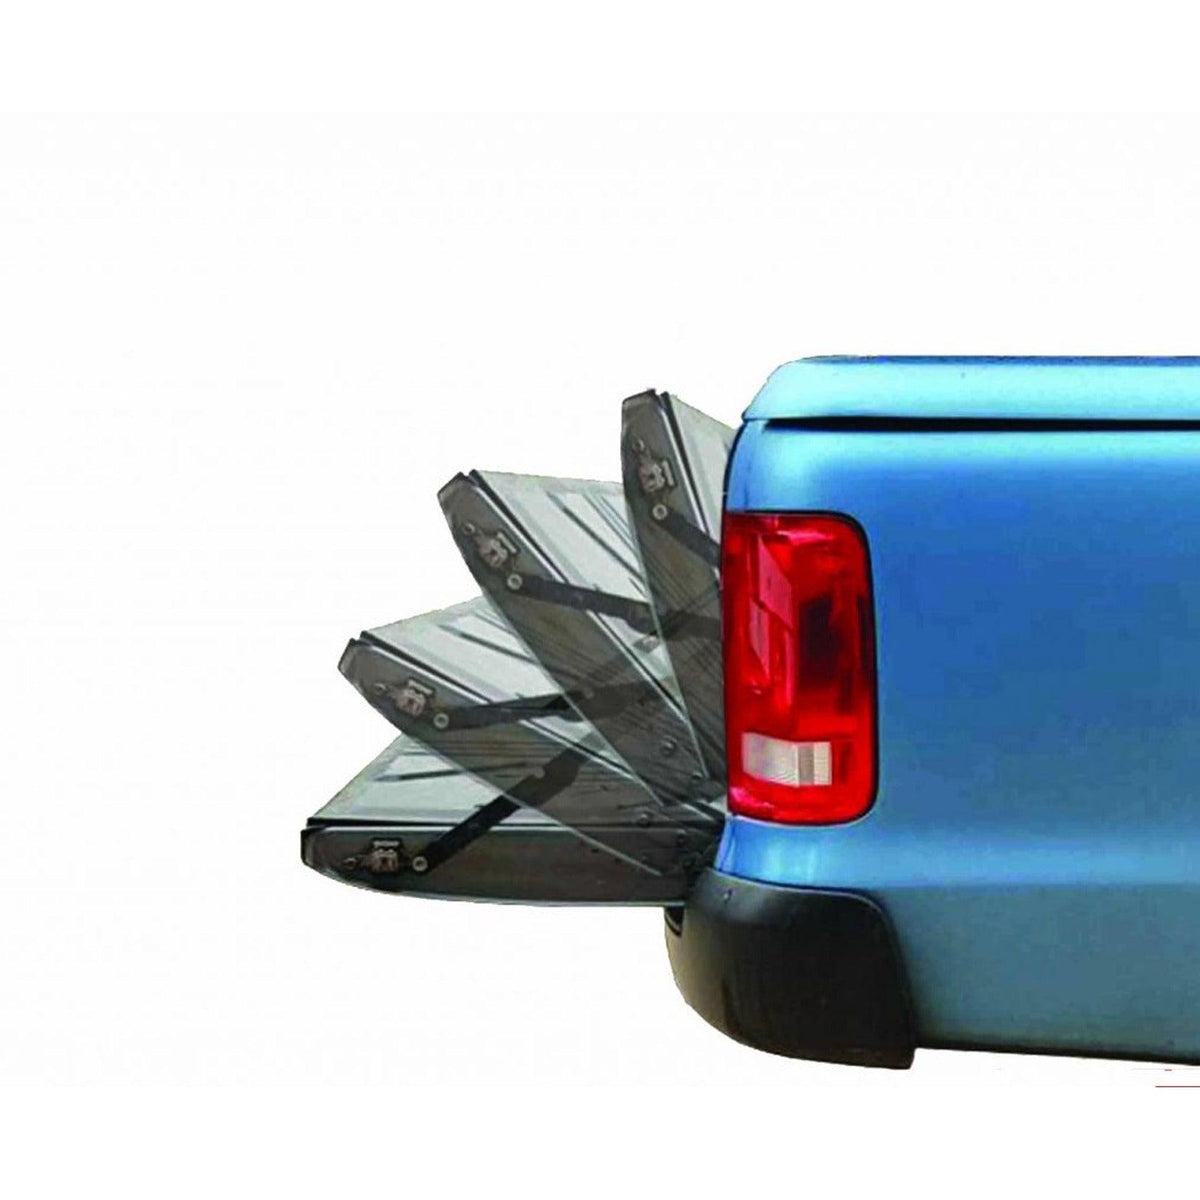 VW AMAROK PROLIFT TAILGATE KIT EASY UP EASY DOWN - Storm Xccessories2